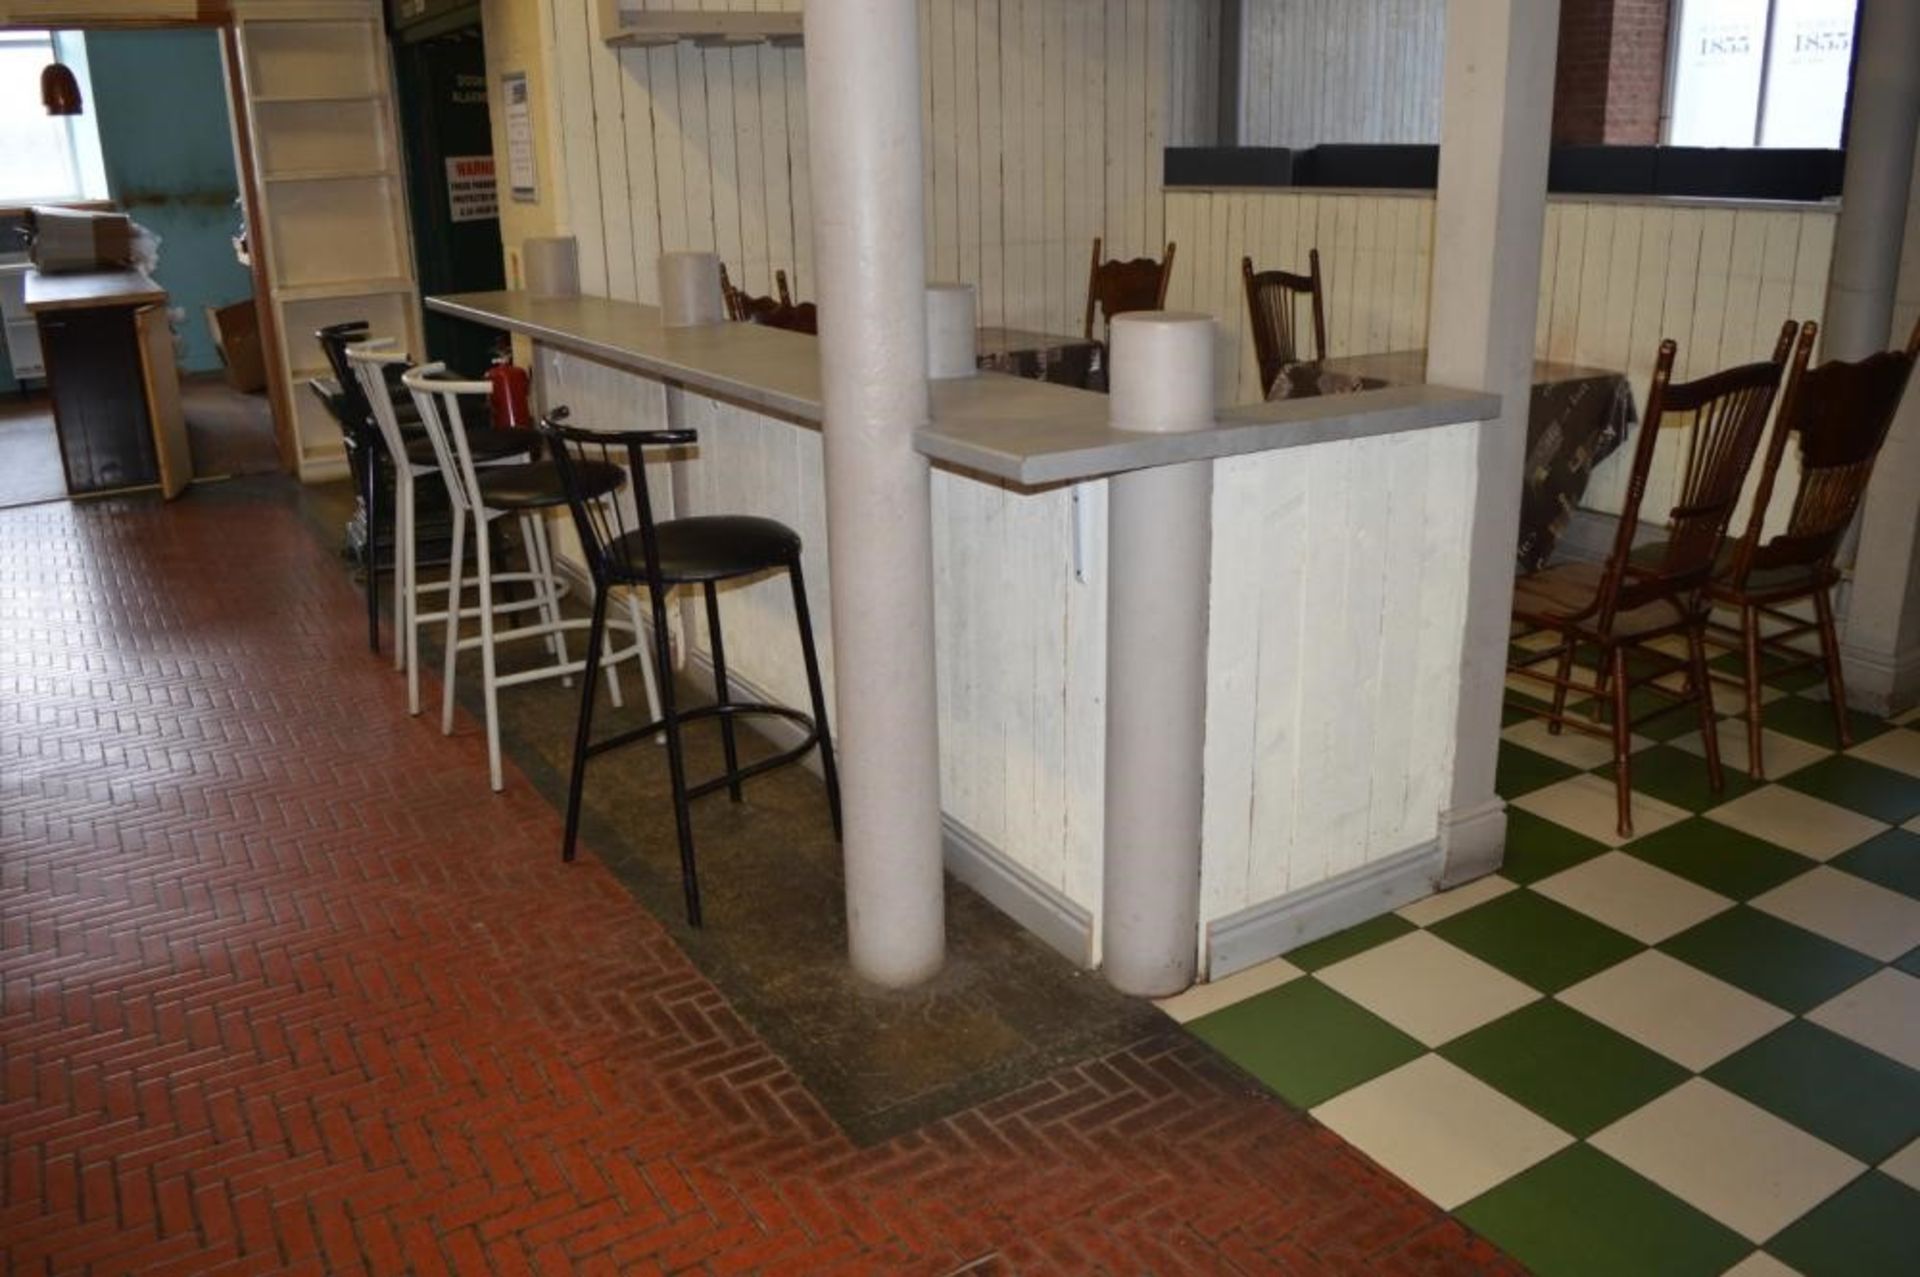 1 x Assorted Collection to Include Botany Bay Cafe 1855 Fixtures - Includes Seating Bar, Wall Paneli - Image 5 of 17